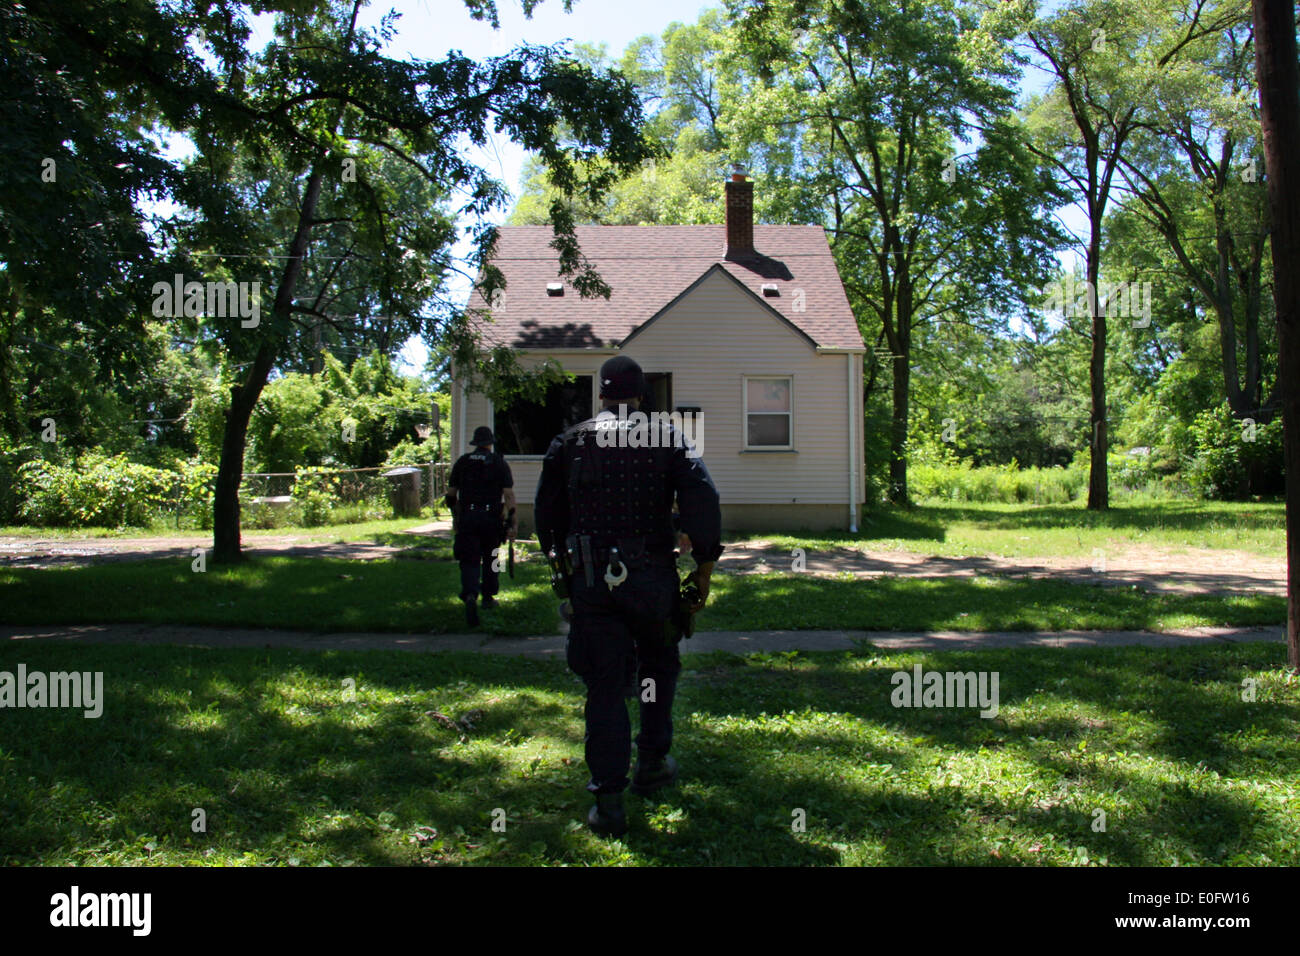 Detroit Police Narcs - Narcotics officers - appraoch a house raided for drugs, Detroit, Michigan, USA Stock Photo